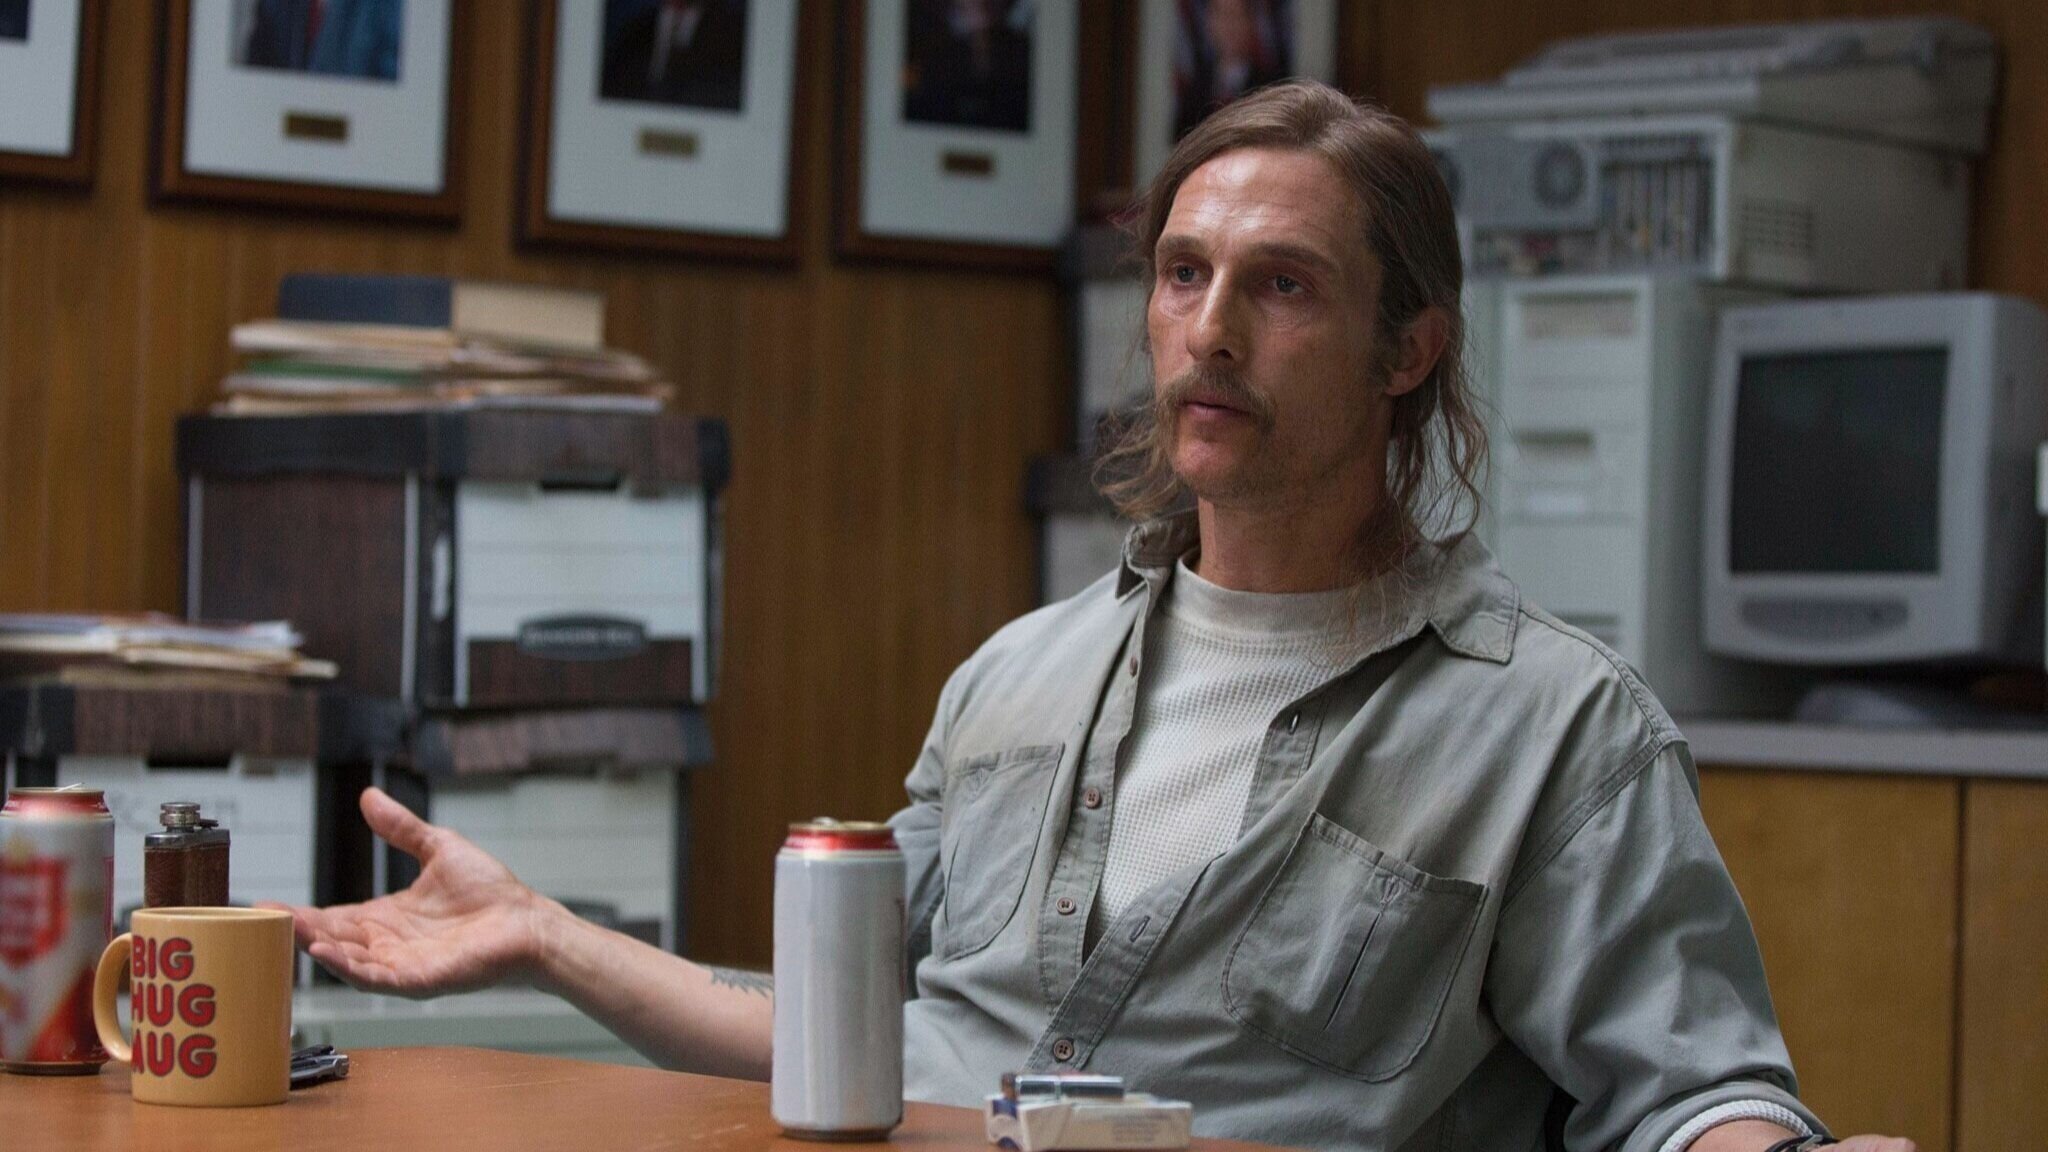 Rust and cohle фото 20